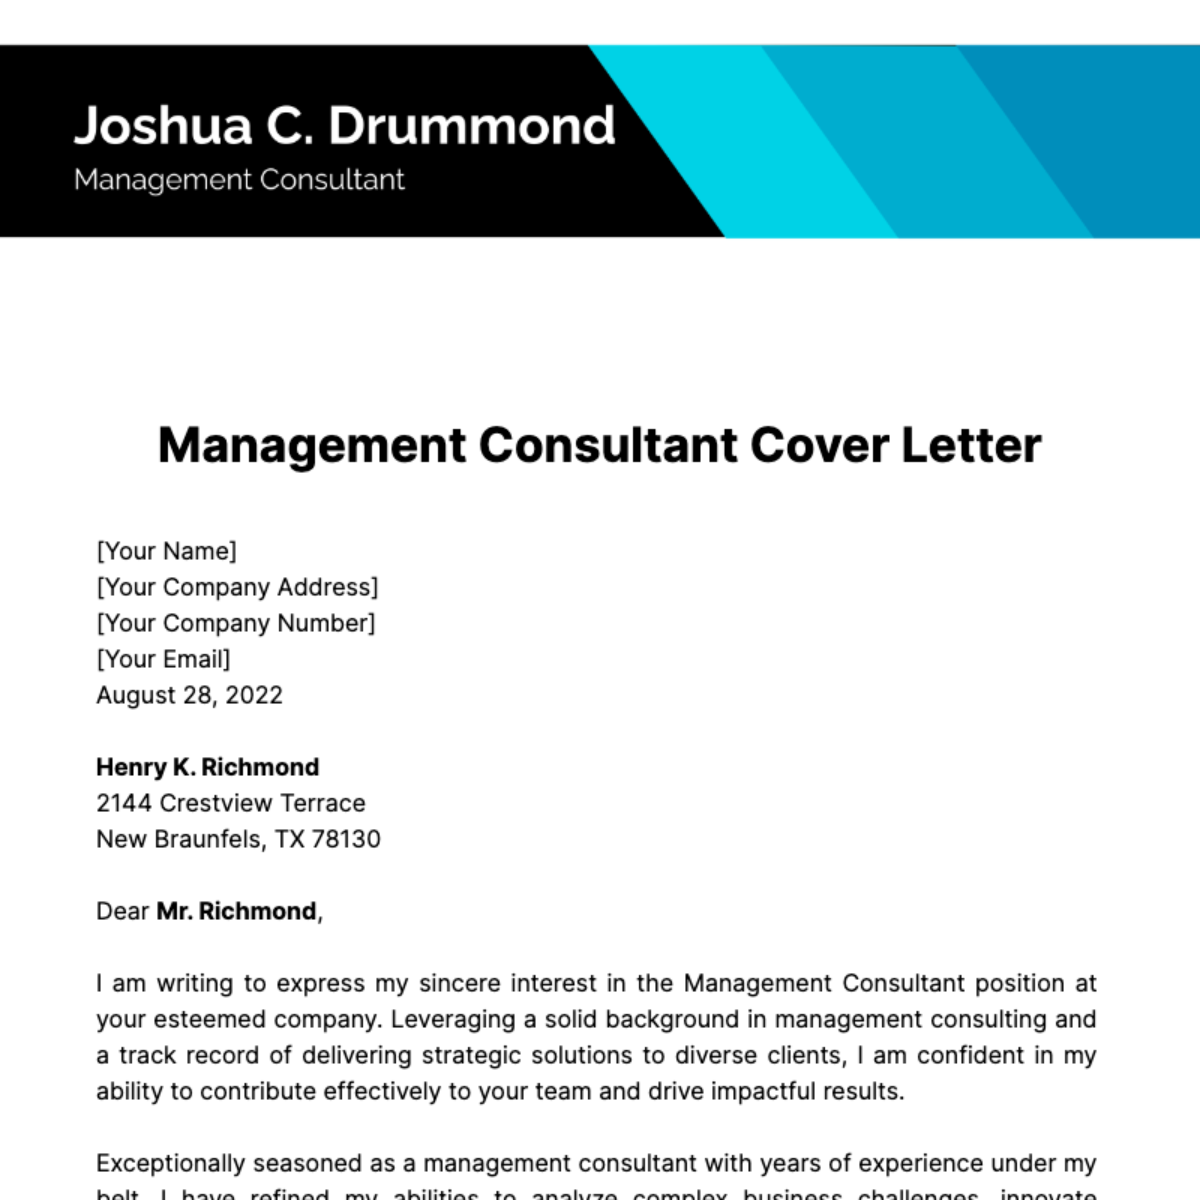 Management Consultant Cover Letter Template